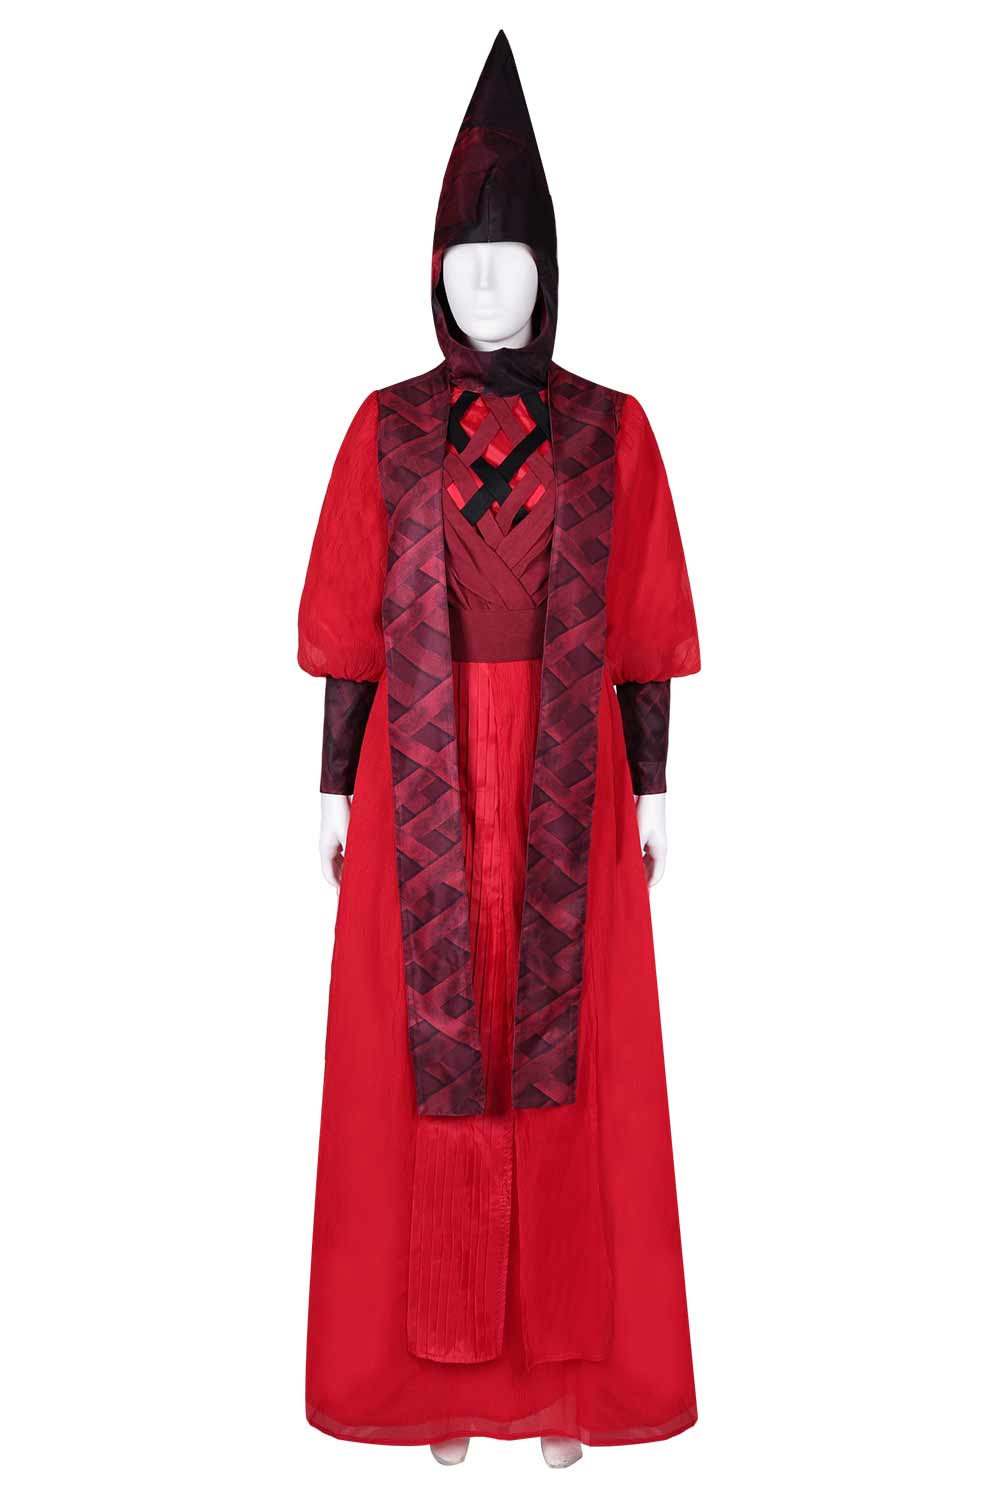 TV Ahsoka Star Wars Witch Nightsisters Dress Outfits Halloween Carnival Red Suit Cosplay Costume